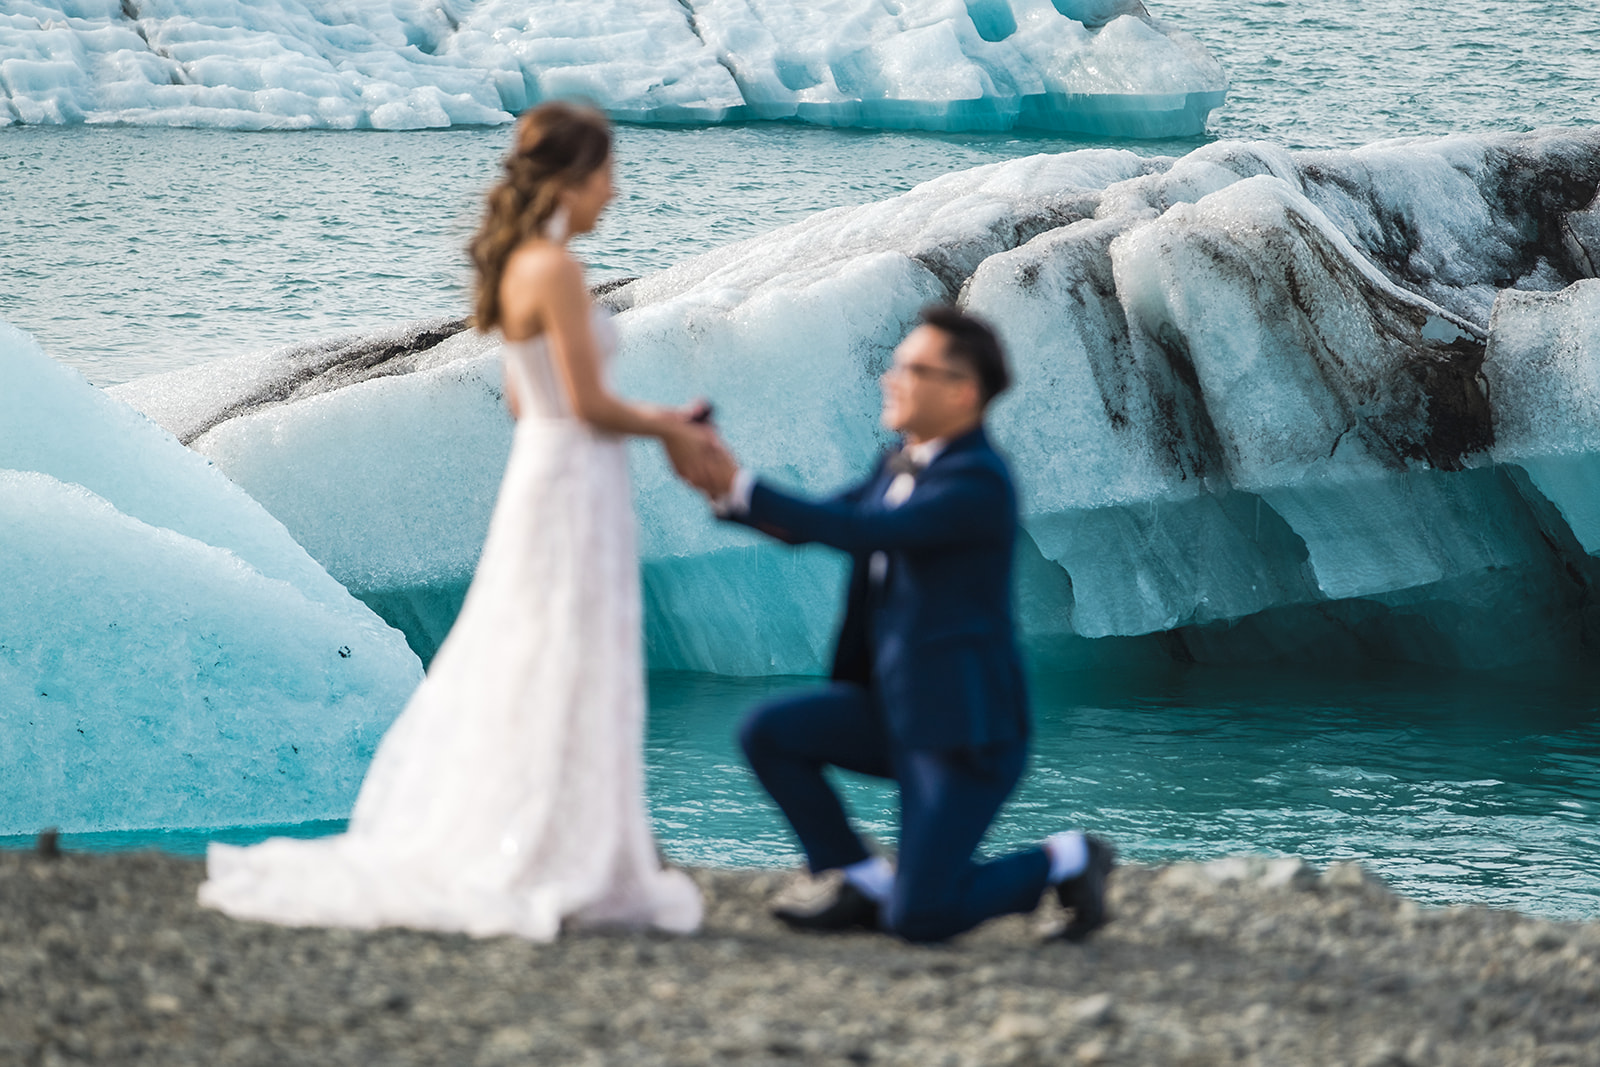 Surprise proposal in front of Icebergs Pre-wedding Adventure Session at Jökulsárlón Glacier Lagoon in Iceland